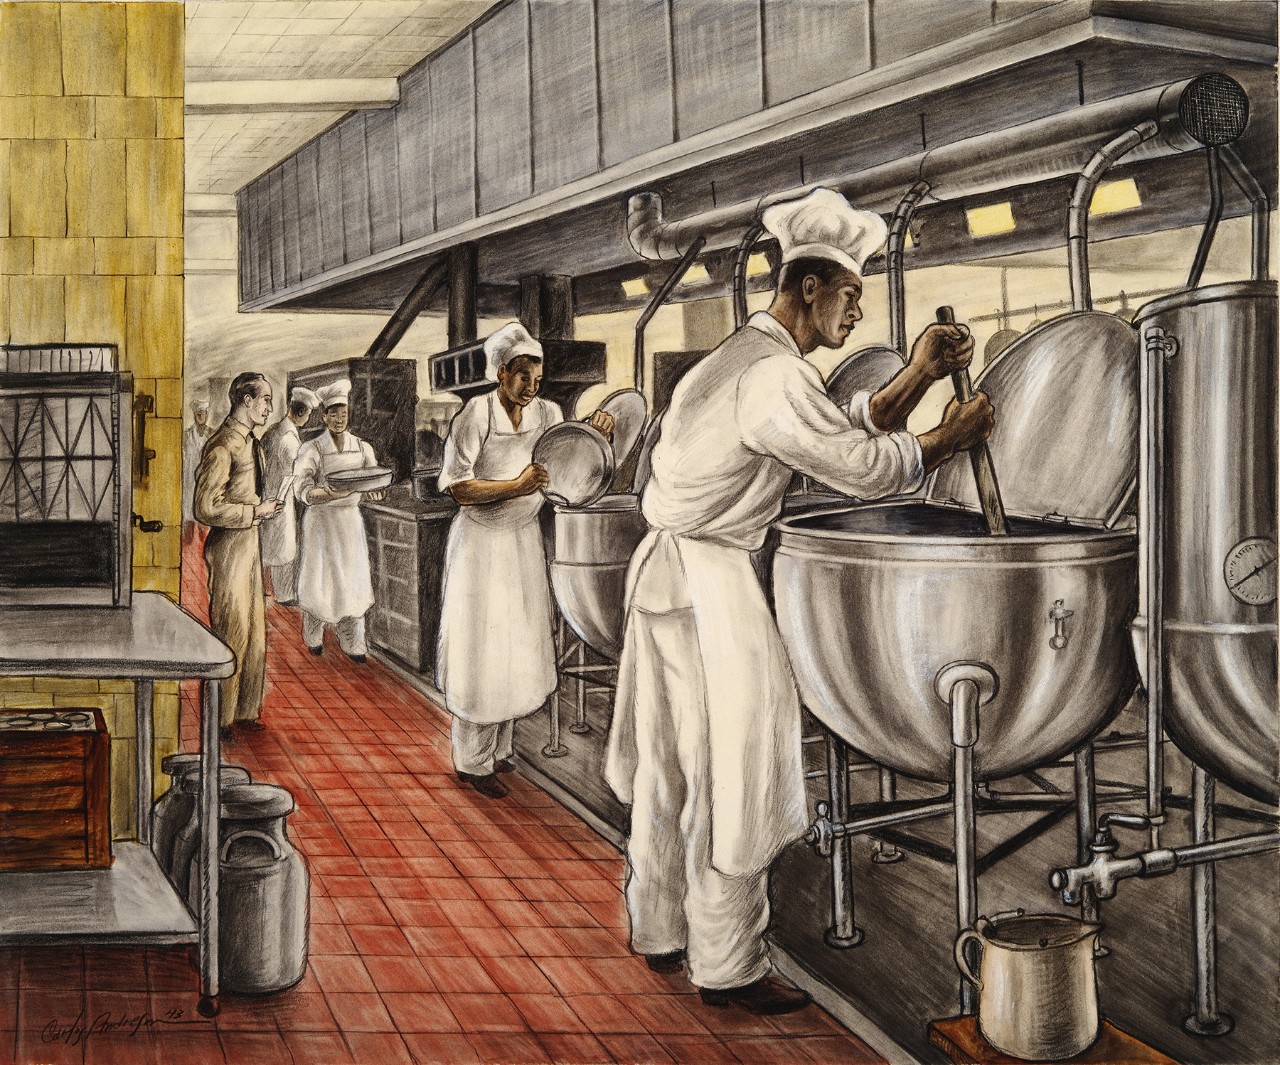 Navy cooks working in the hospital kitchen